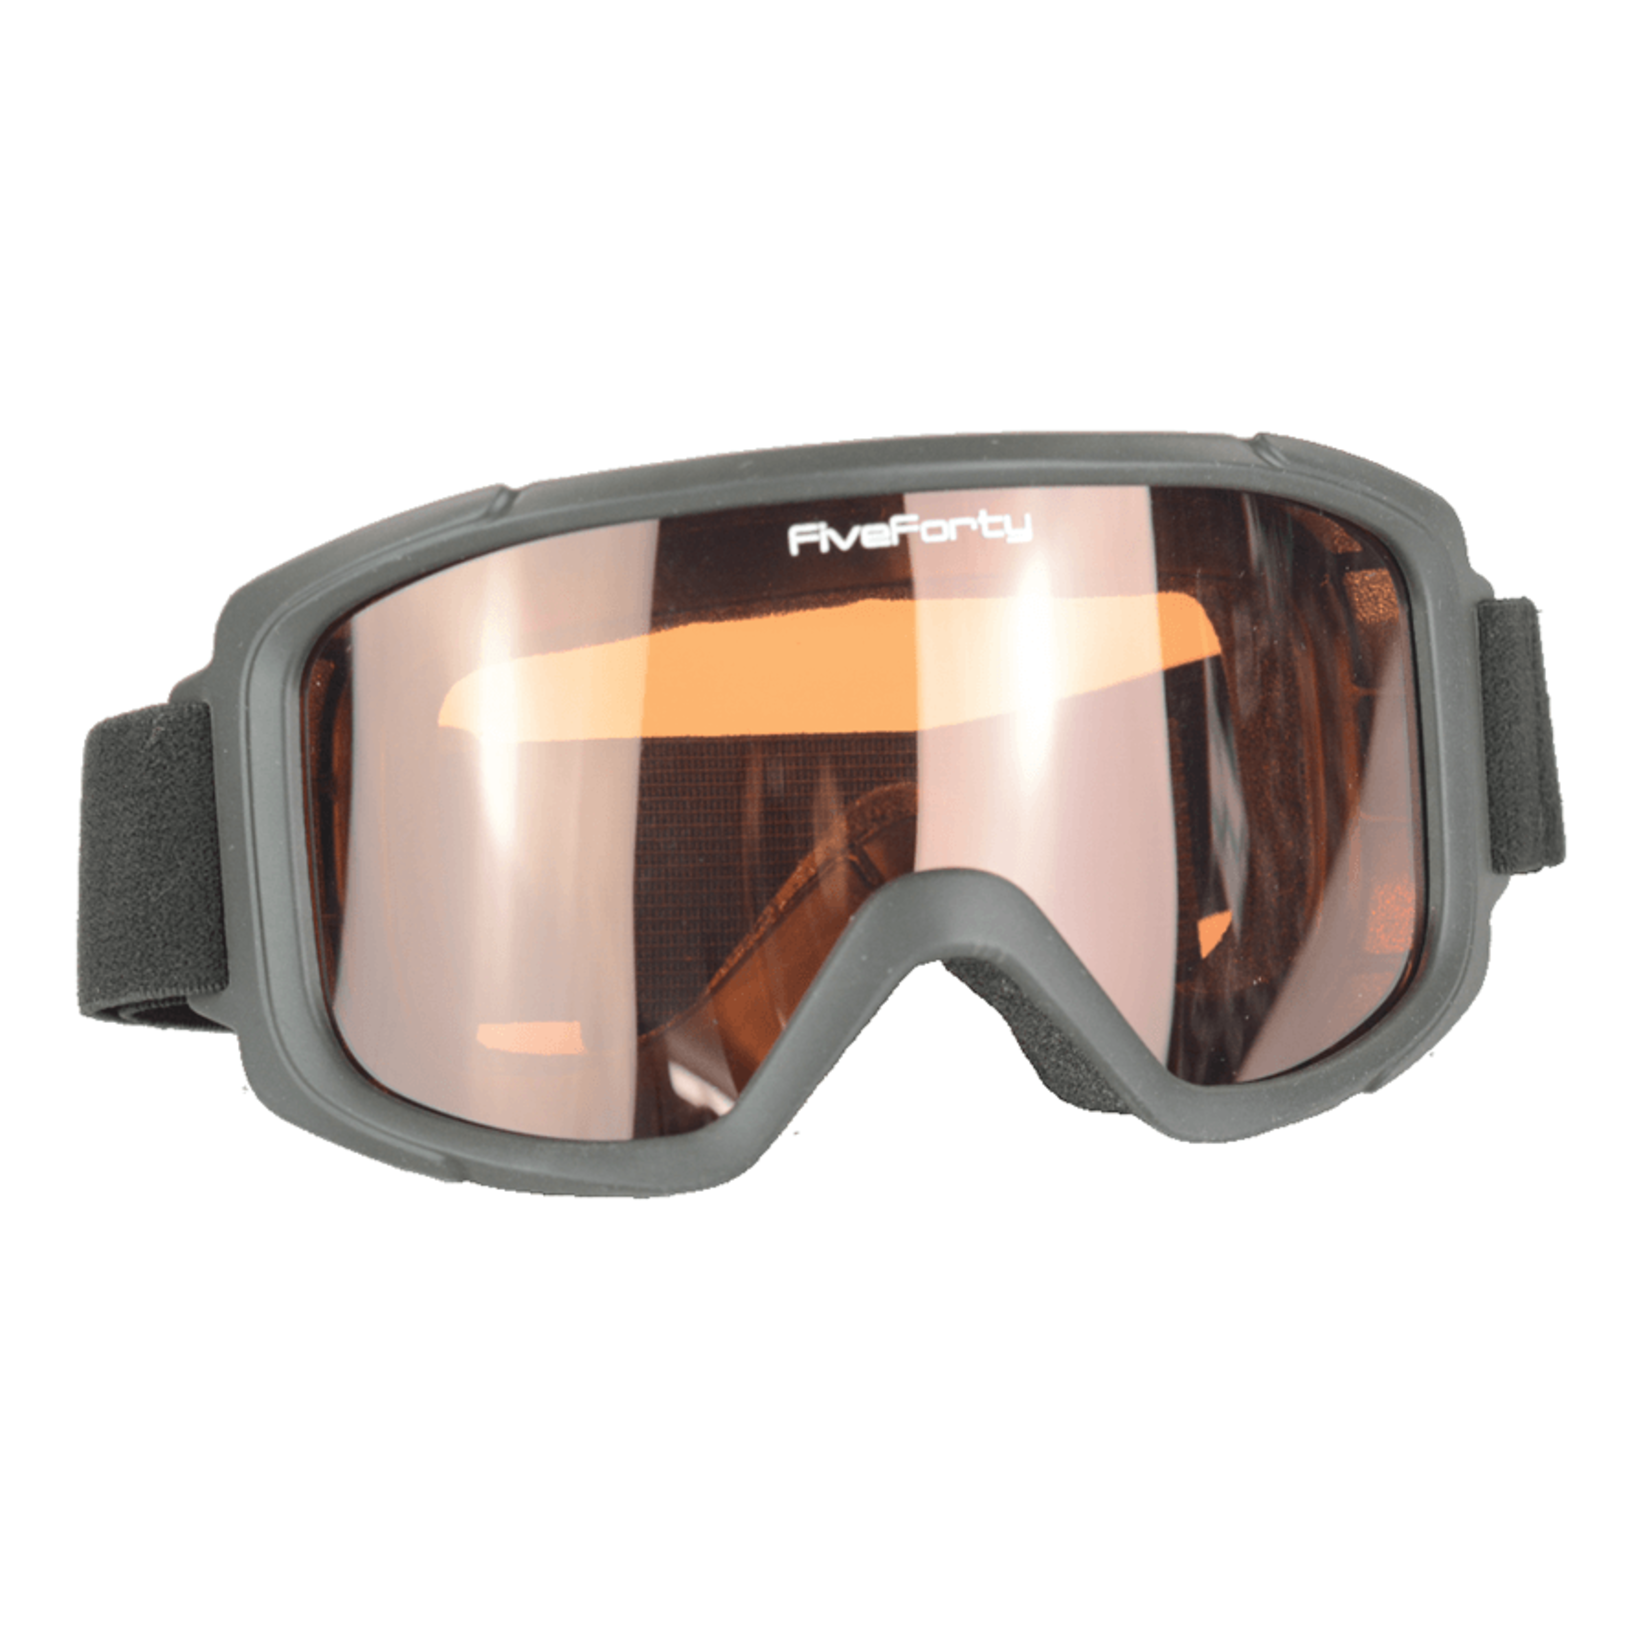 FiveForty GSD JUNIOR (7-9) GOGGLES